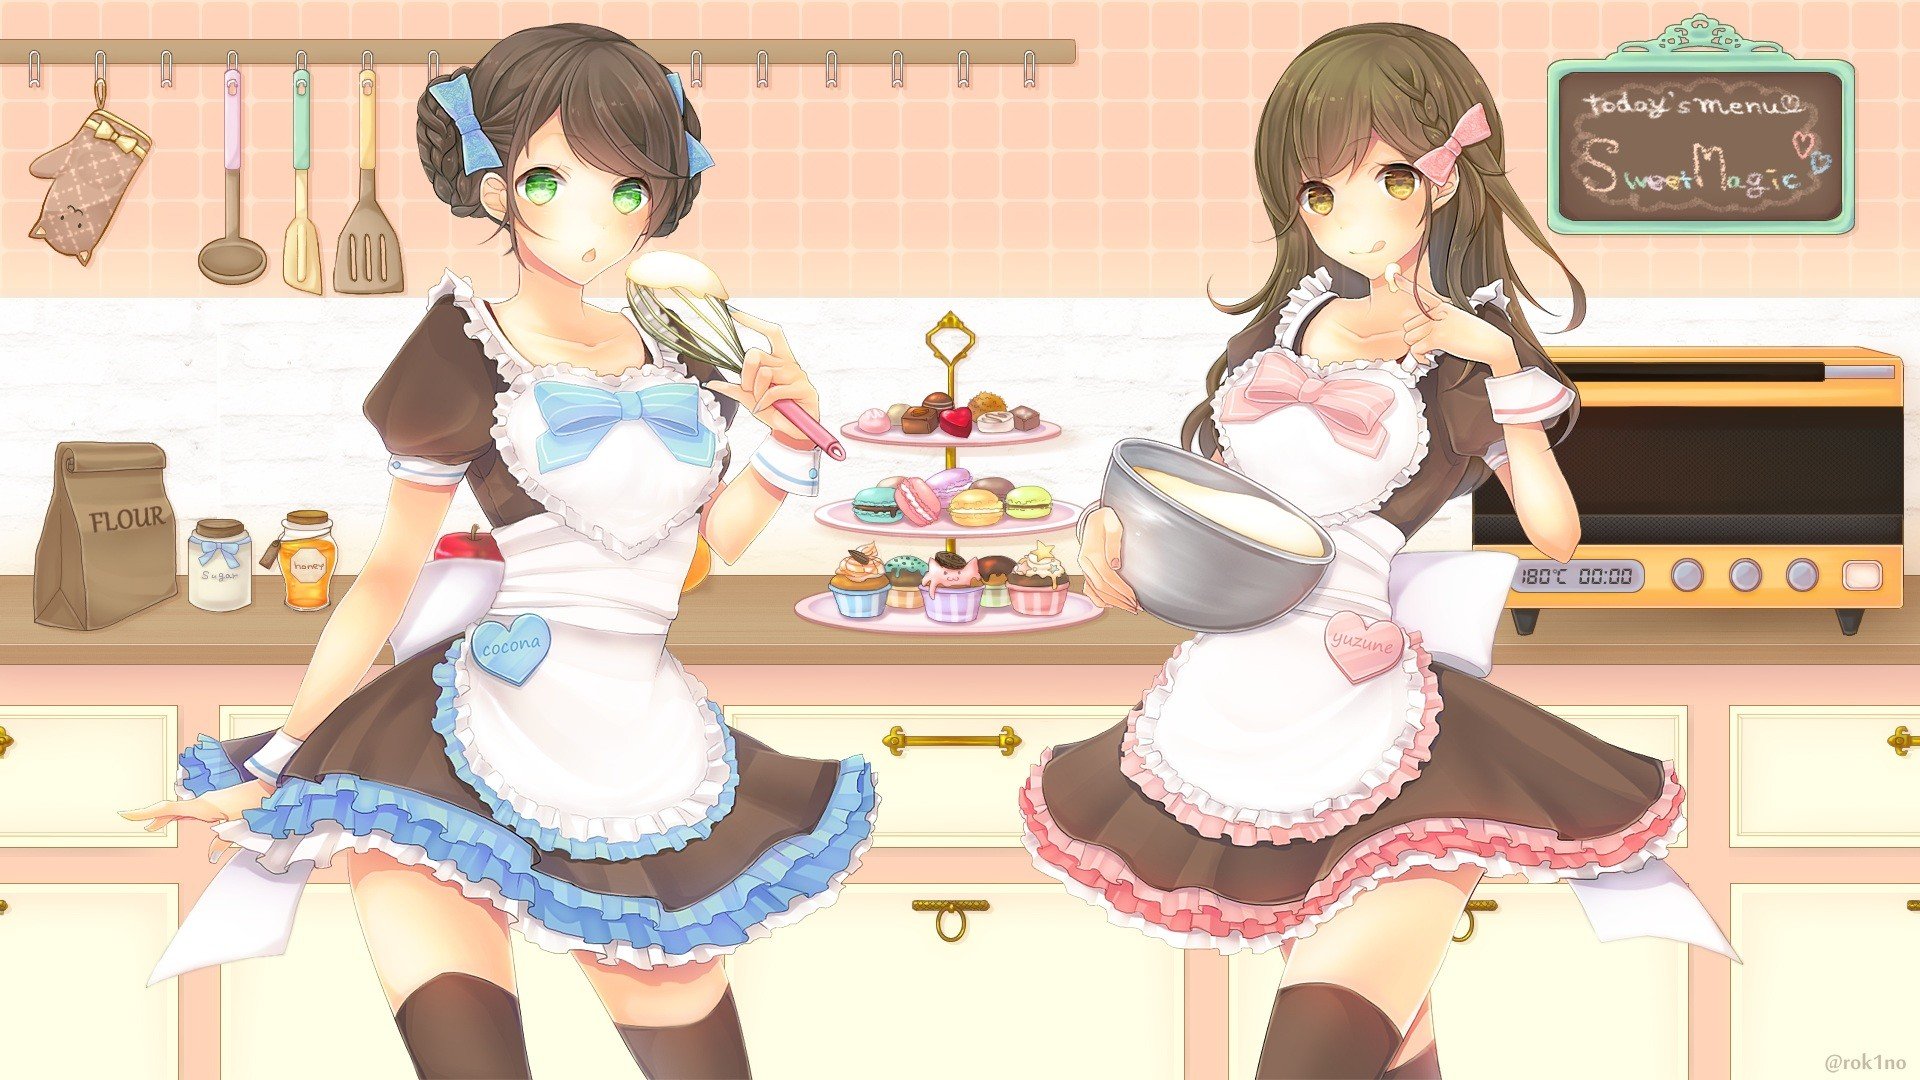 Download hd wallpapers of 193003-thigh-highs, Cakes, Dress, Maid_outfit. 